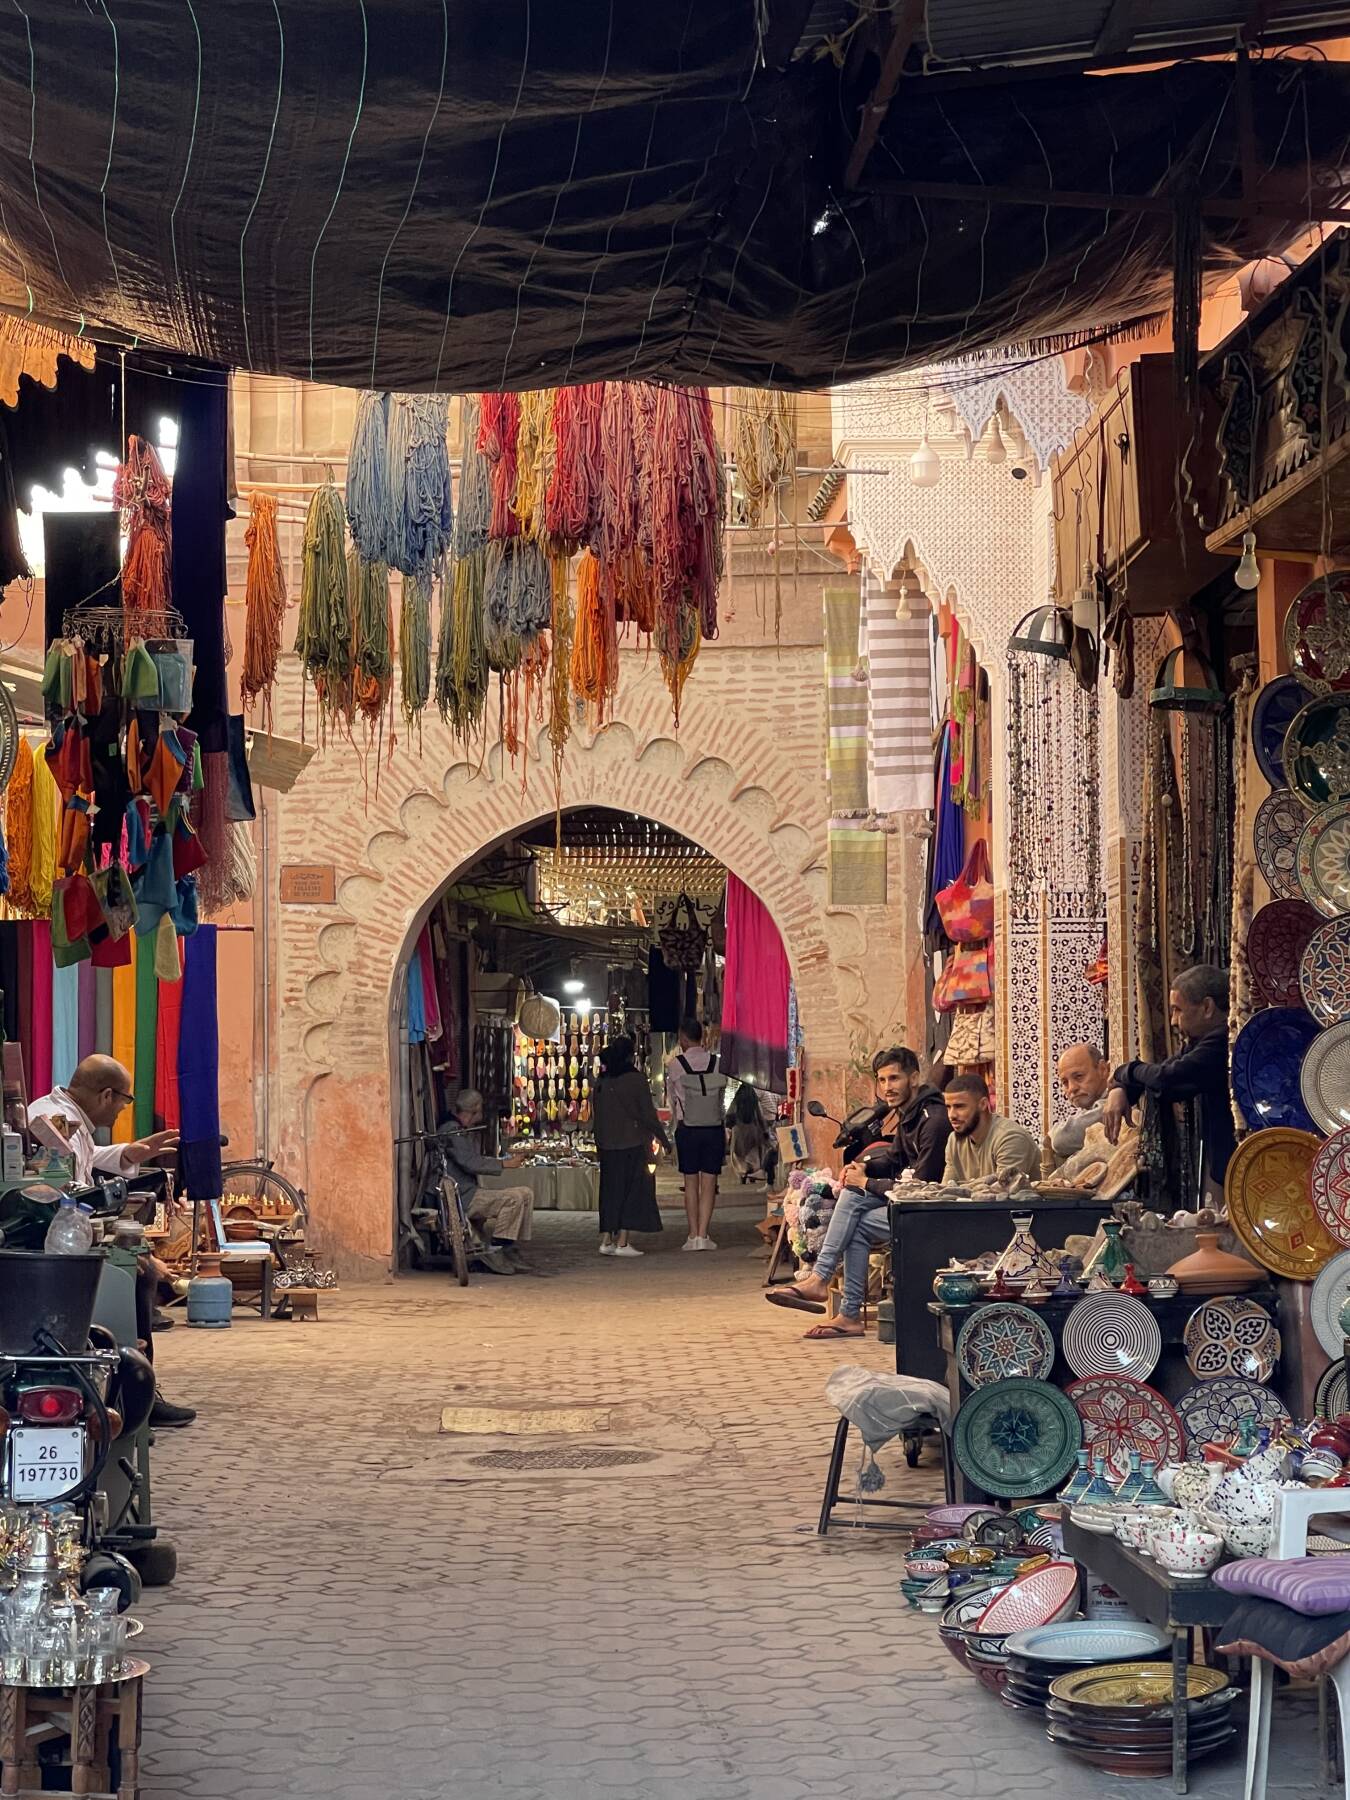 New Year's Eve in Morocco, a trip for women